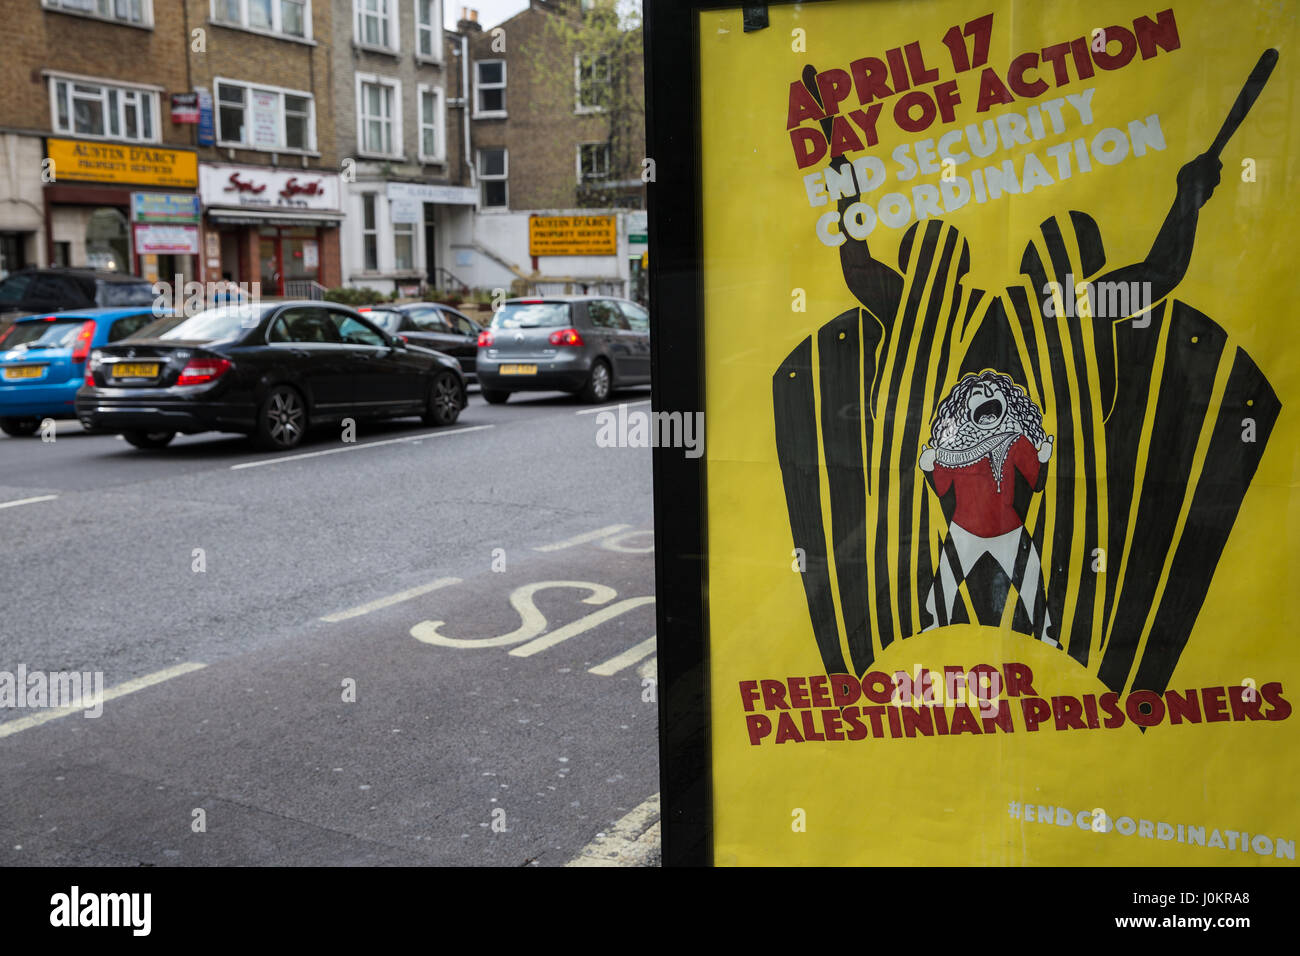 London, UK. 13th April, 2017. A protest stencil in West London for a day of action to coincide with Palestinian Prisoners' Day on 17th April. It calls Stock Photo